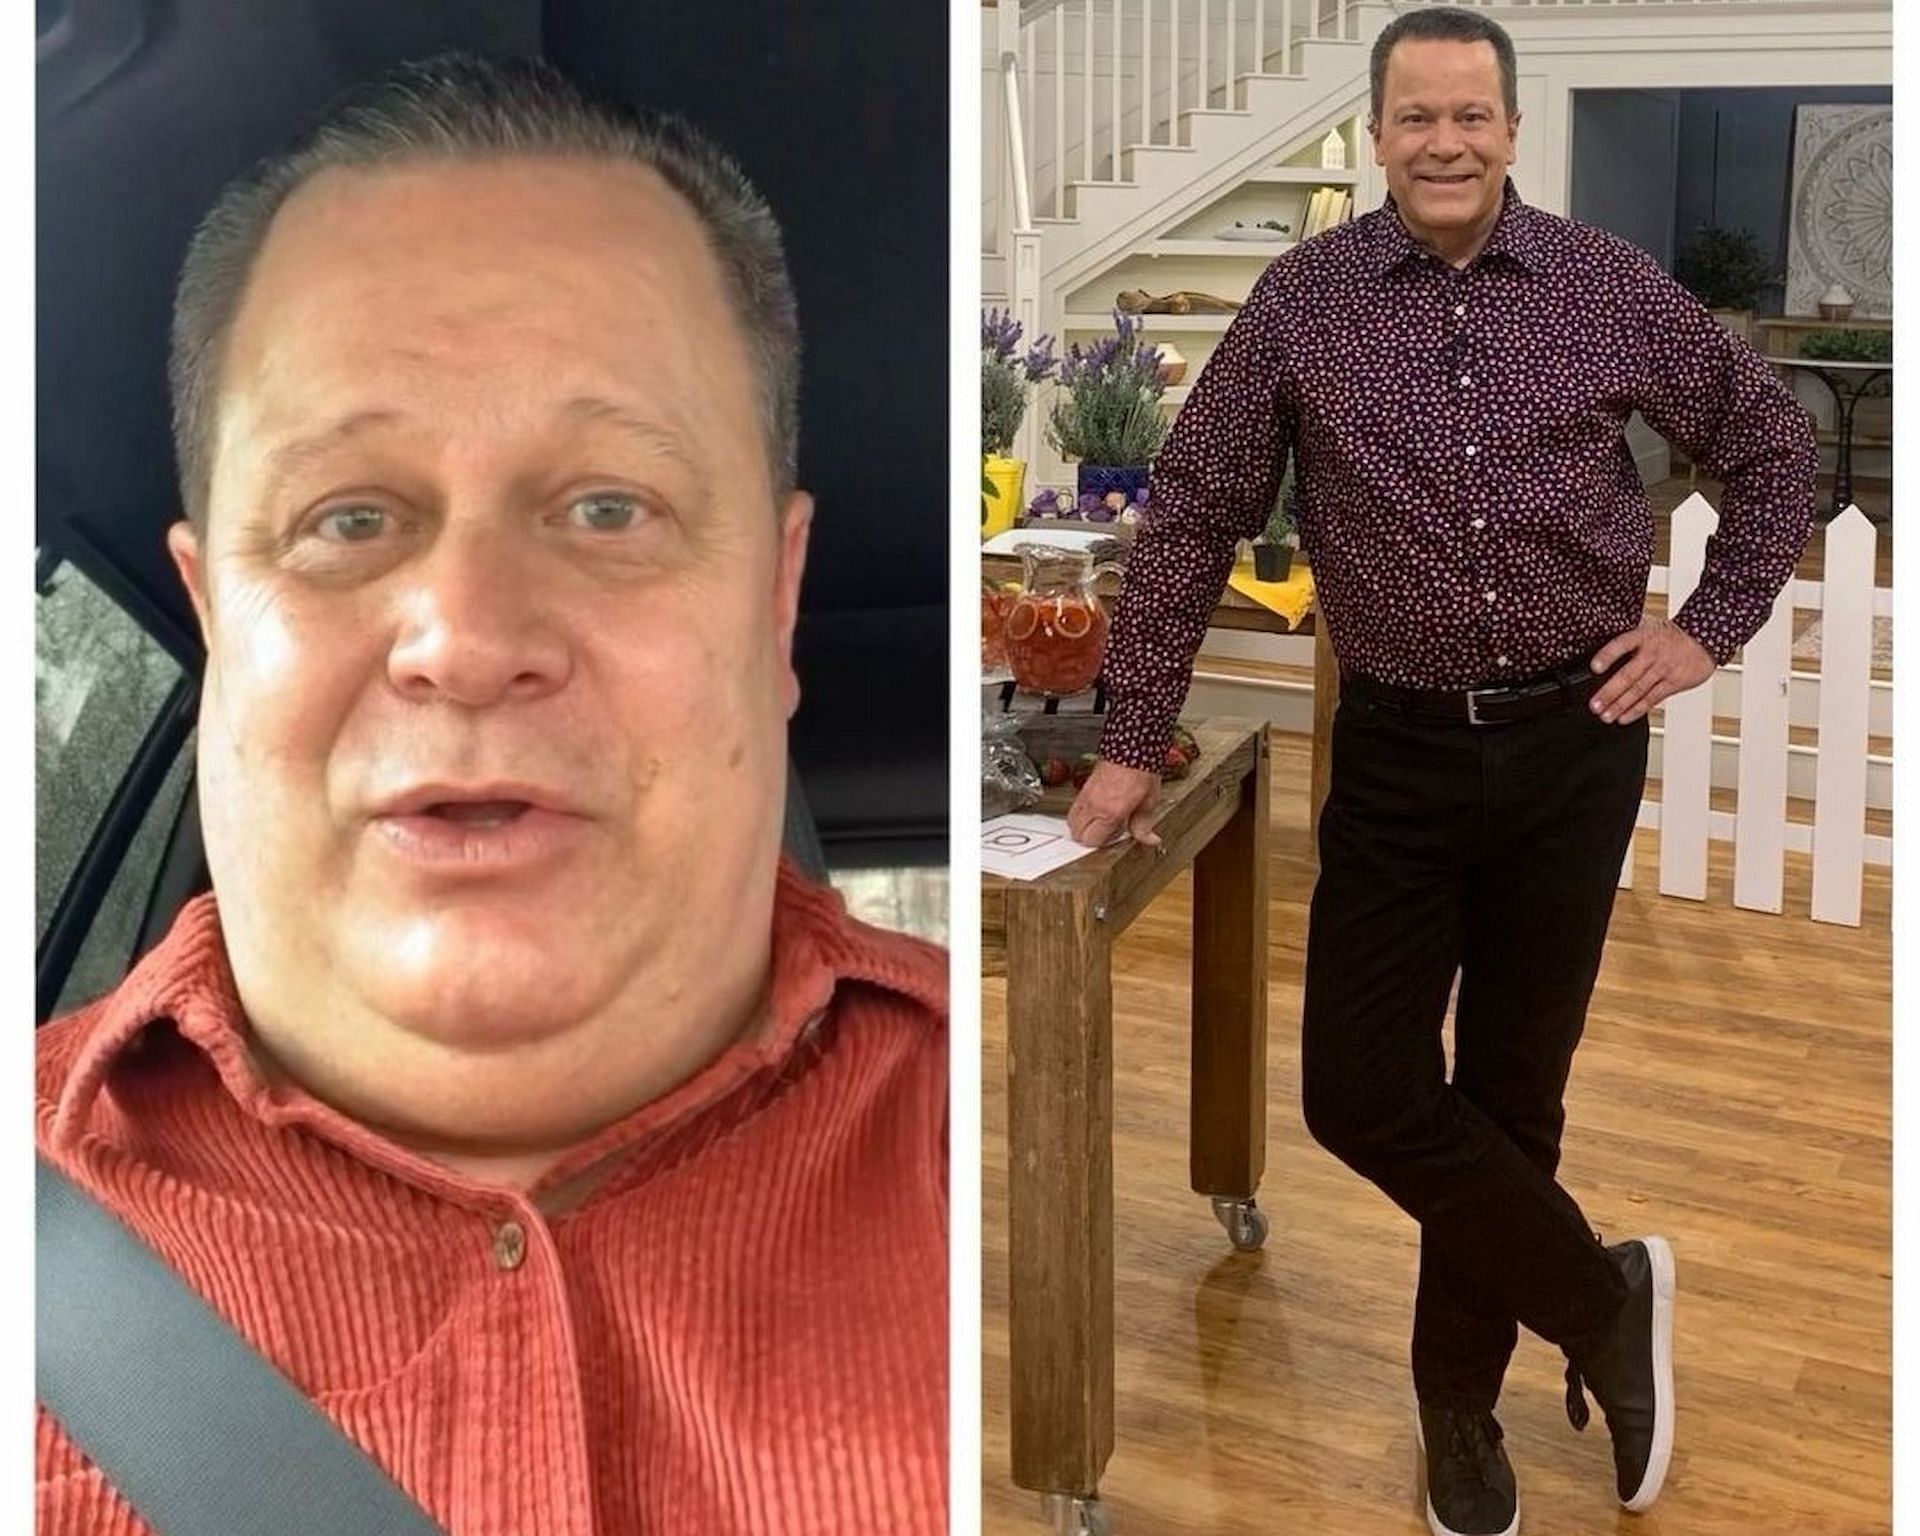 David Venable loses around 70 pounds in 6 months (Image via Instagram/ David Venable)